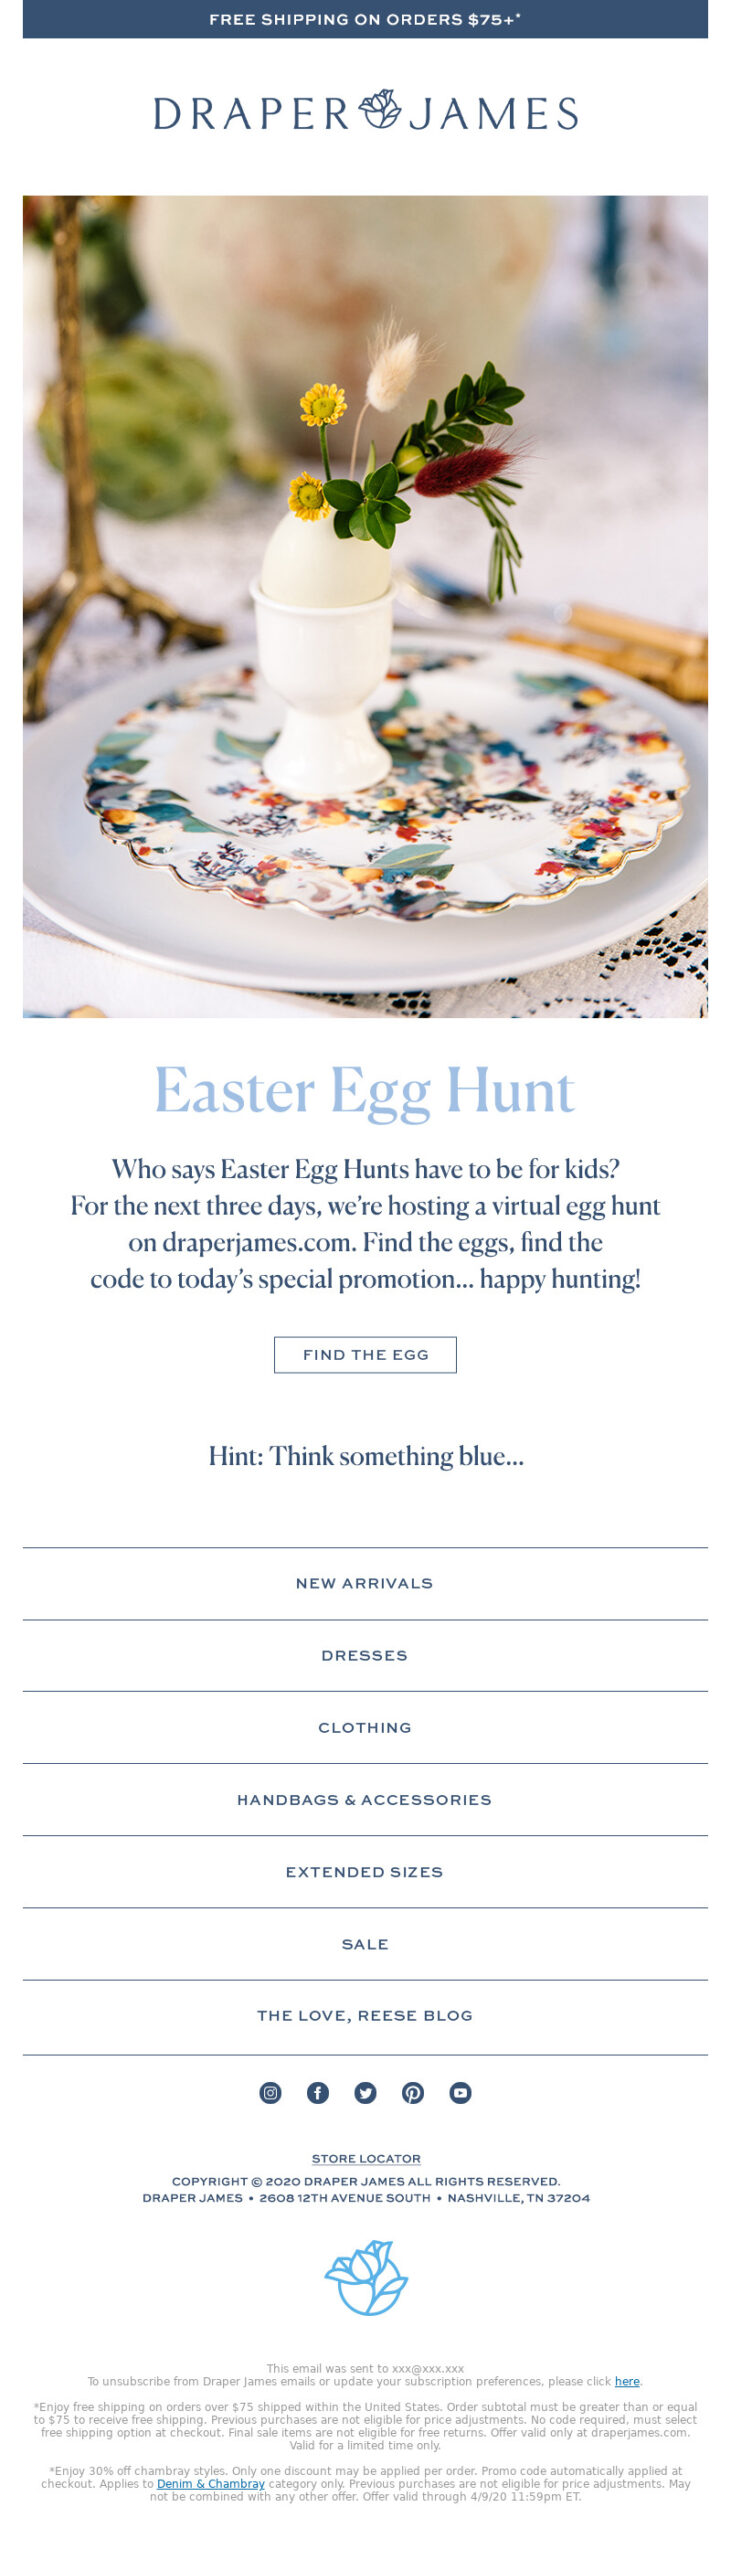 Draper James virtual Easter egg hunt email encouraging customers to explore the website for hidden eggs containing discount codes.